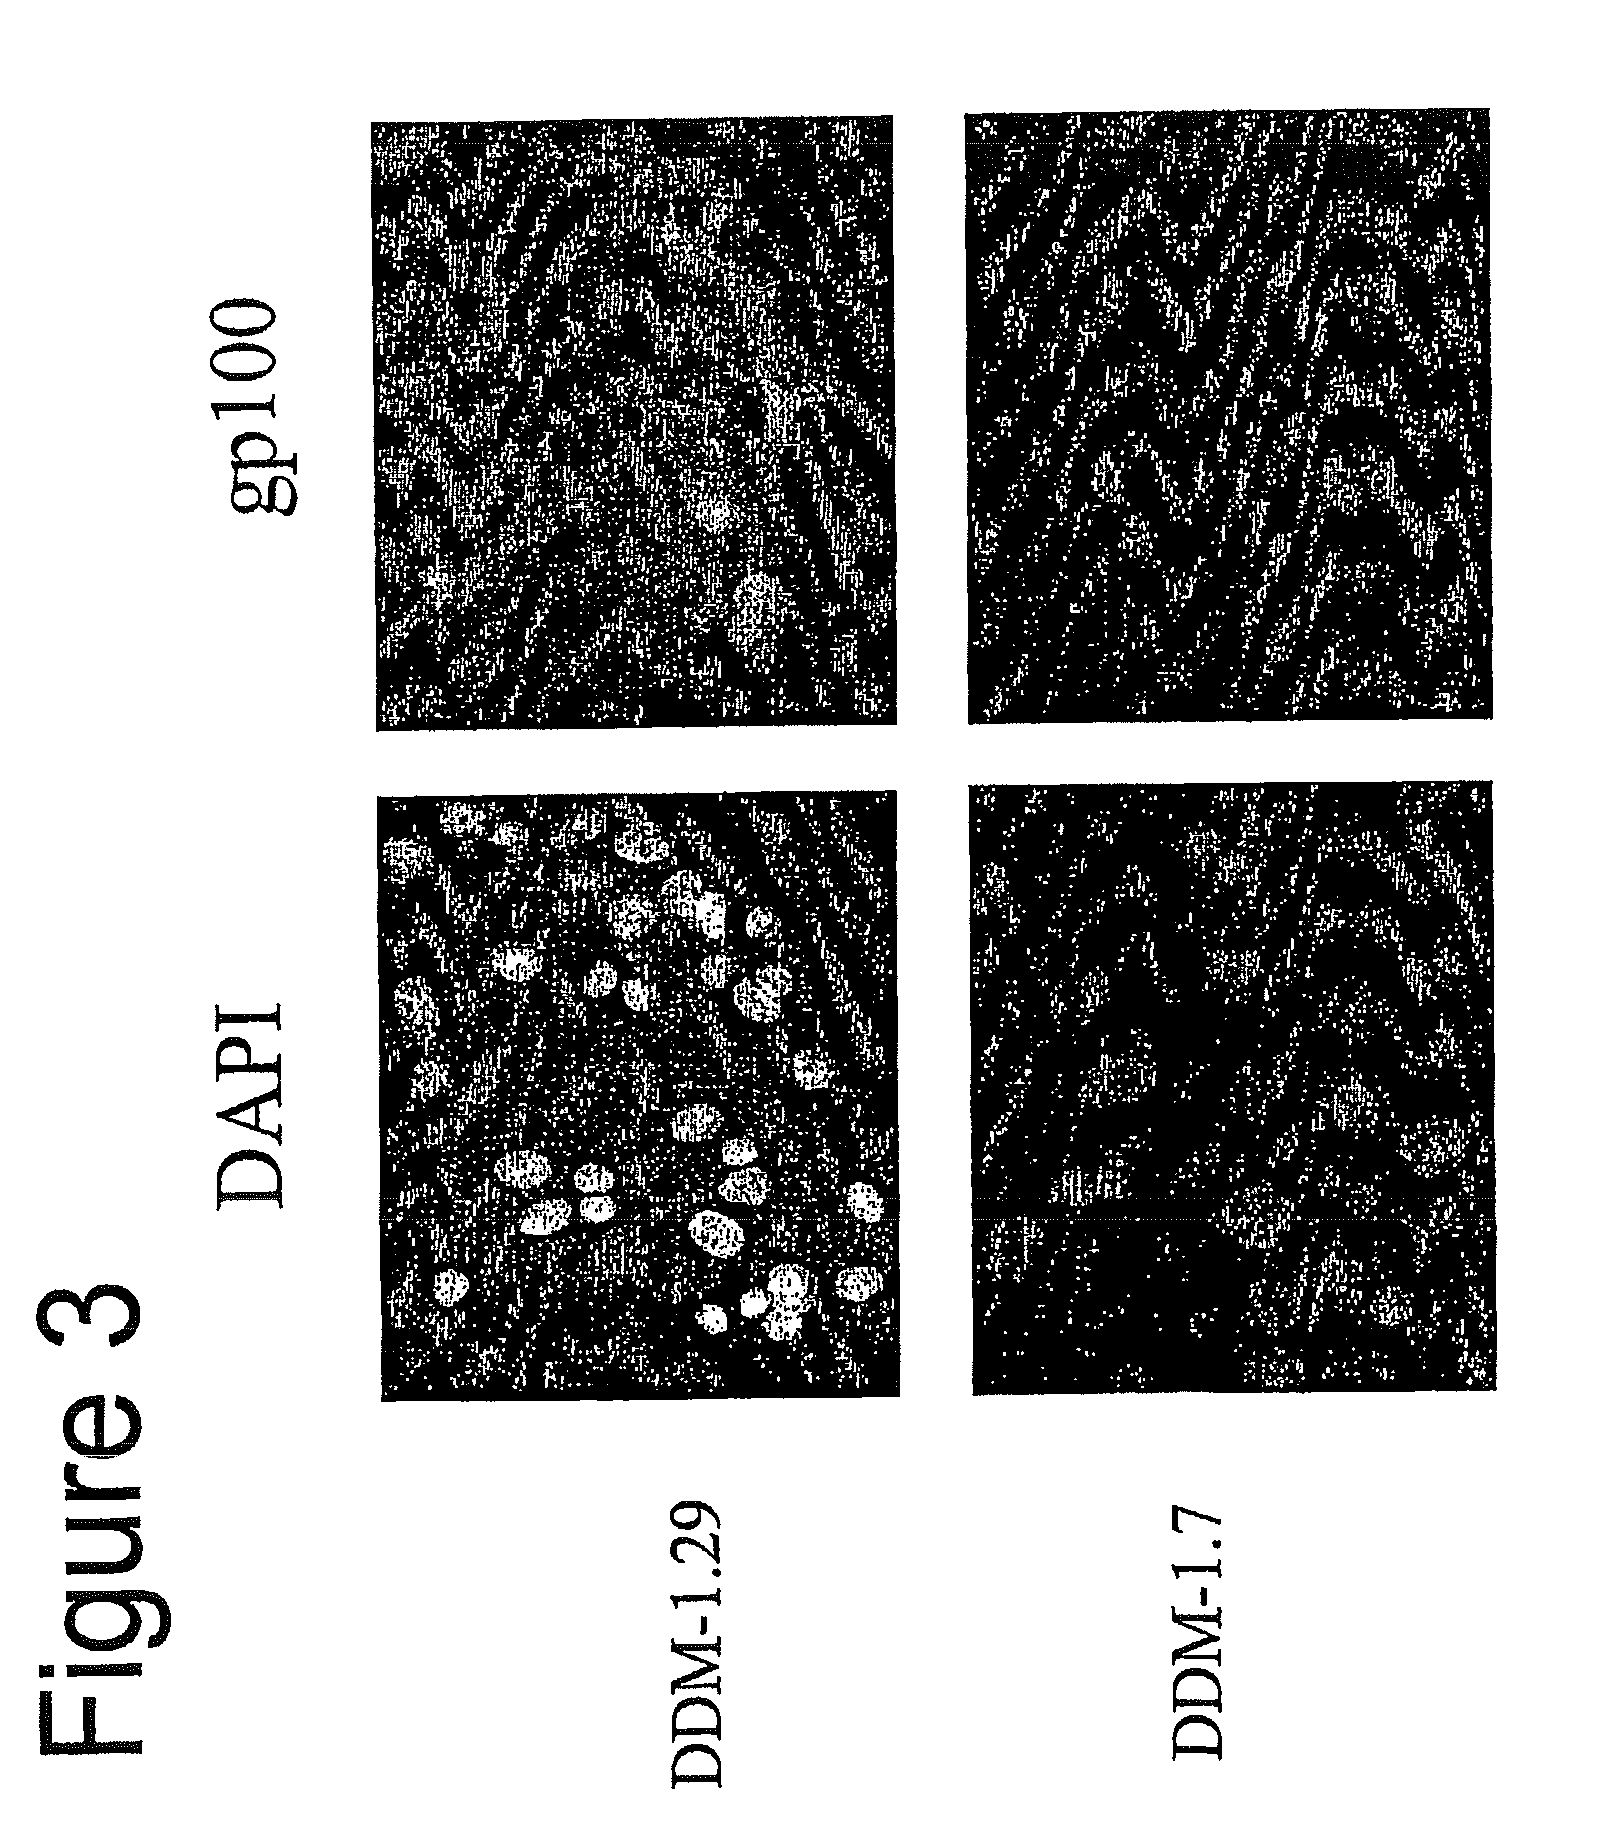 Pharmaceutical composition for inducing an immune response in a human or animal